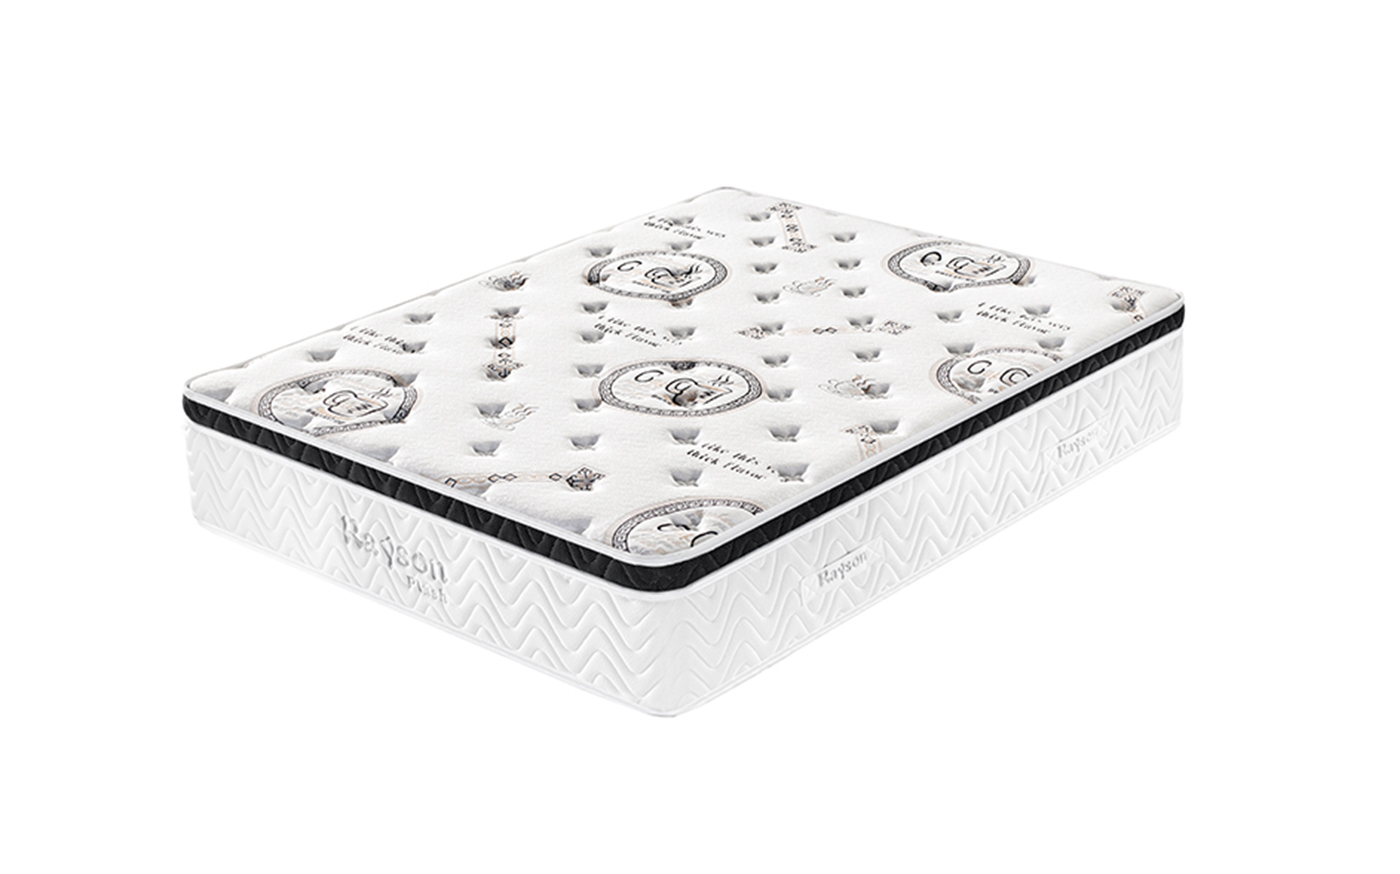 king size hotel collection queen mattress wholesale at discount Synwin